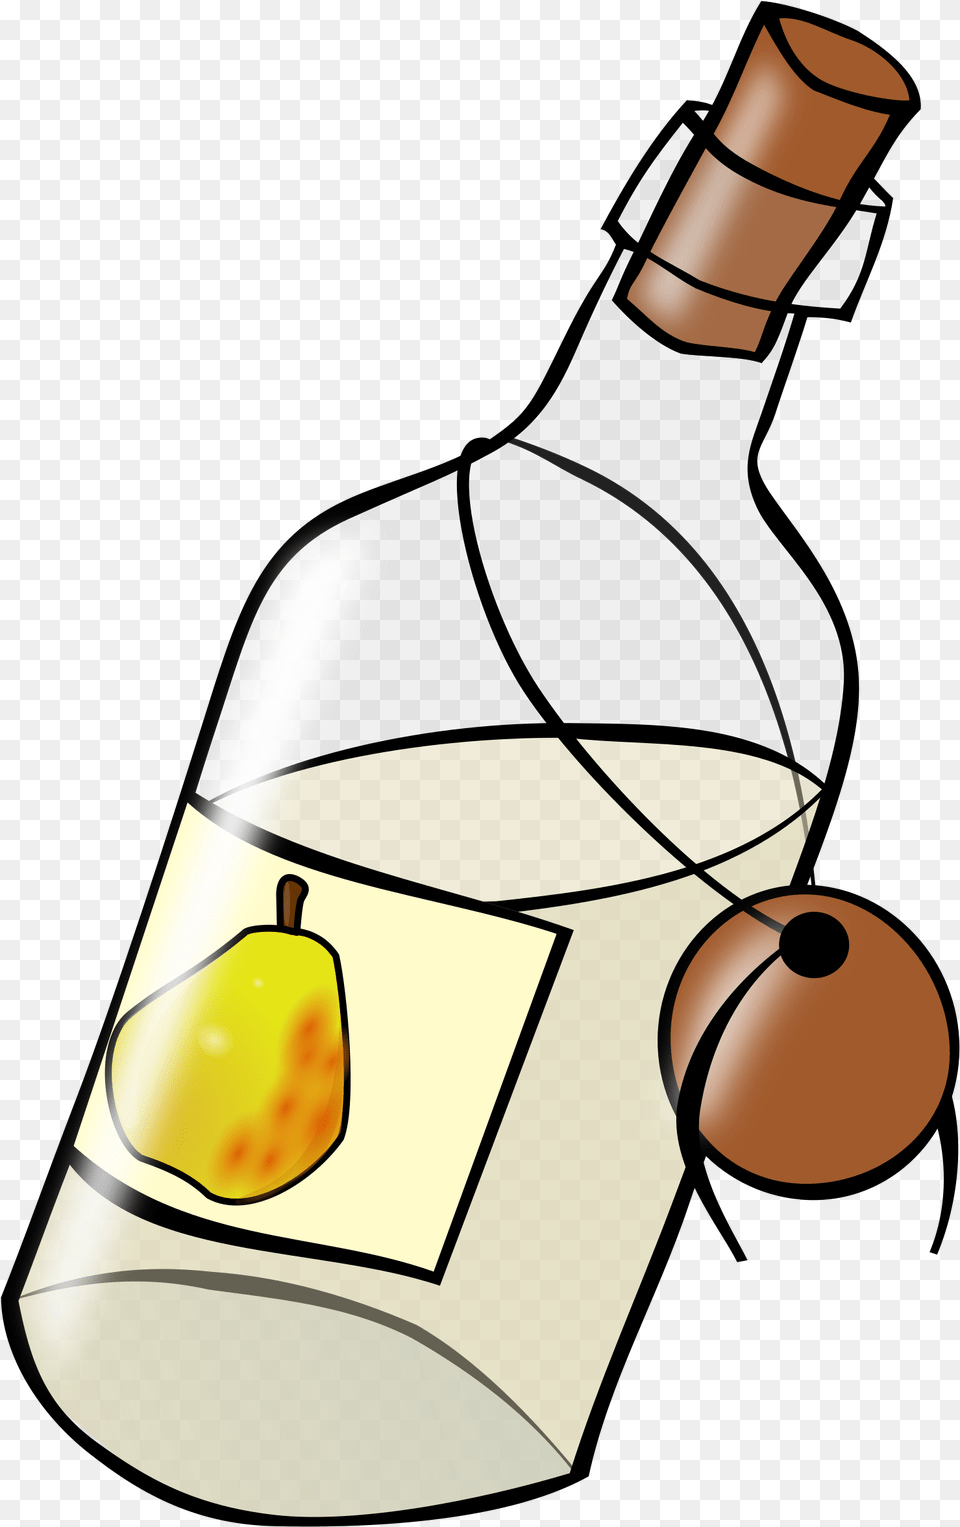 This Icons Design Of Bottle With Moonshine, Alcohol, Wine, Liquor, Beverage Png